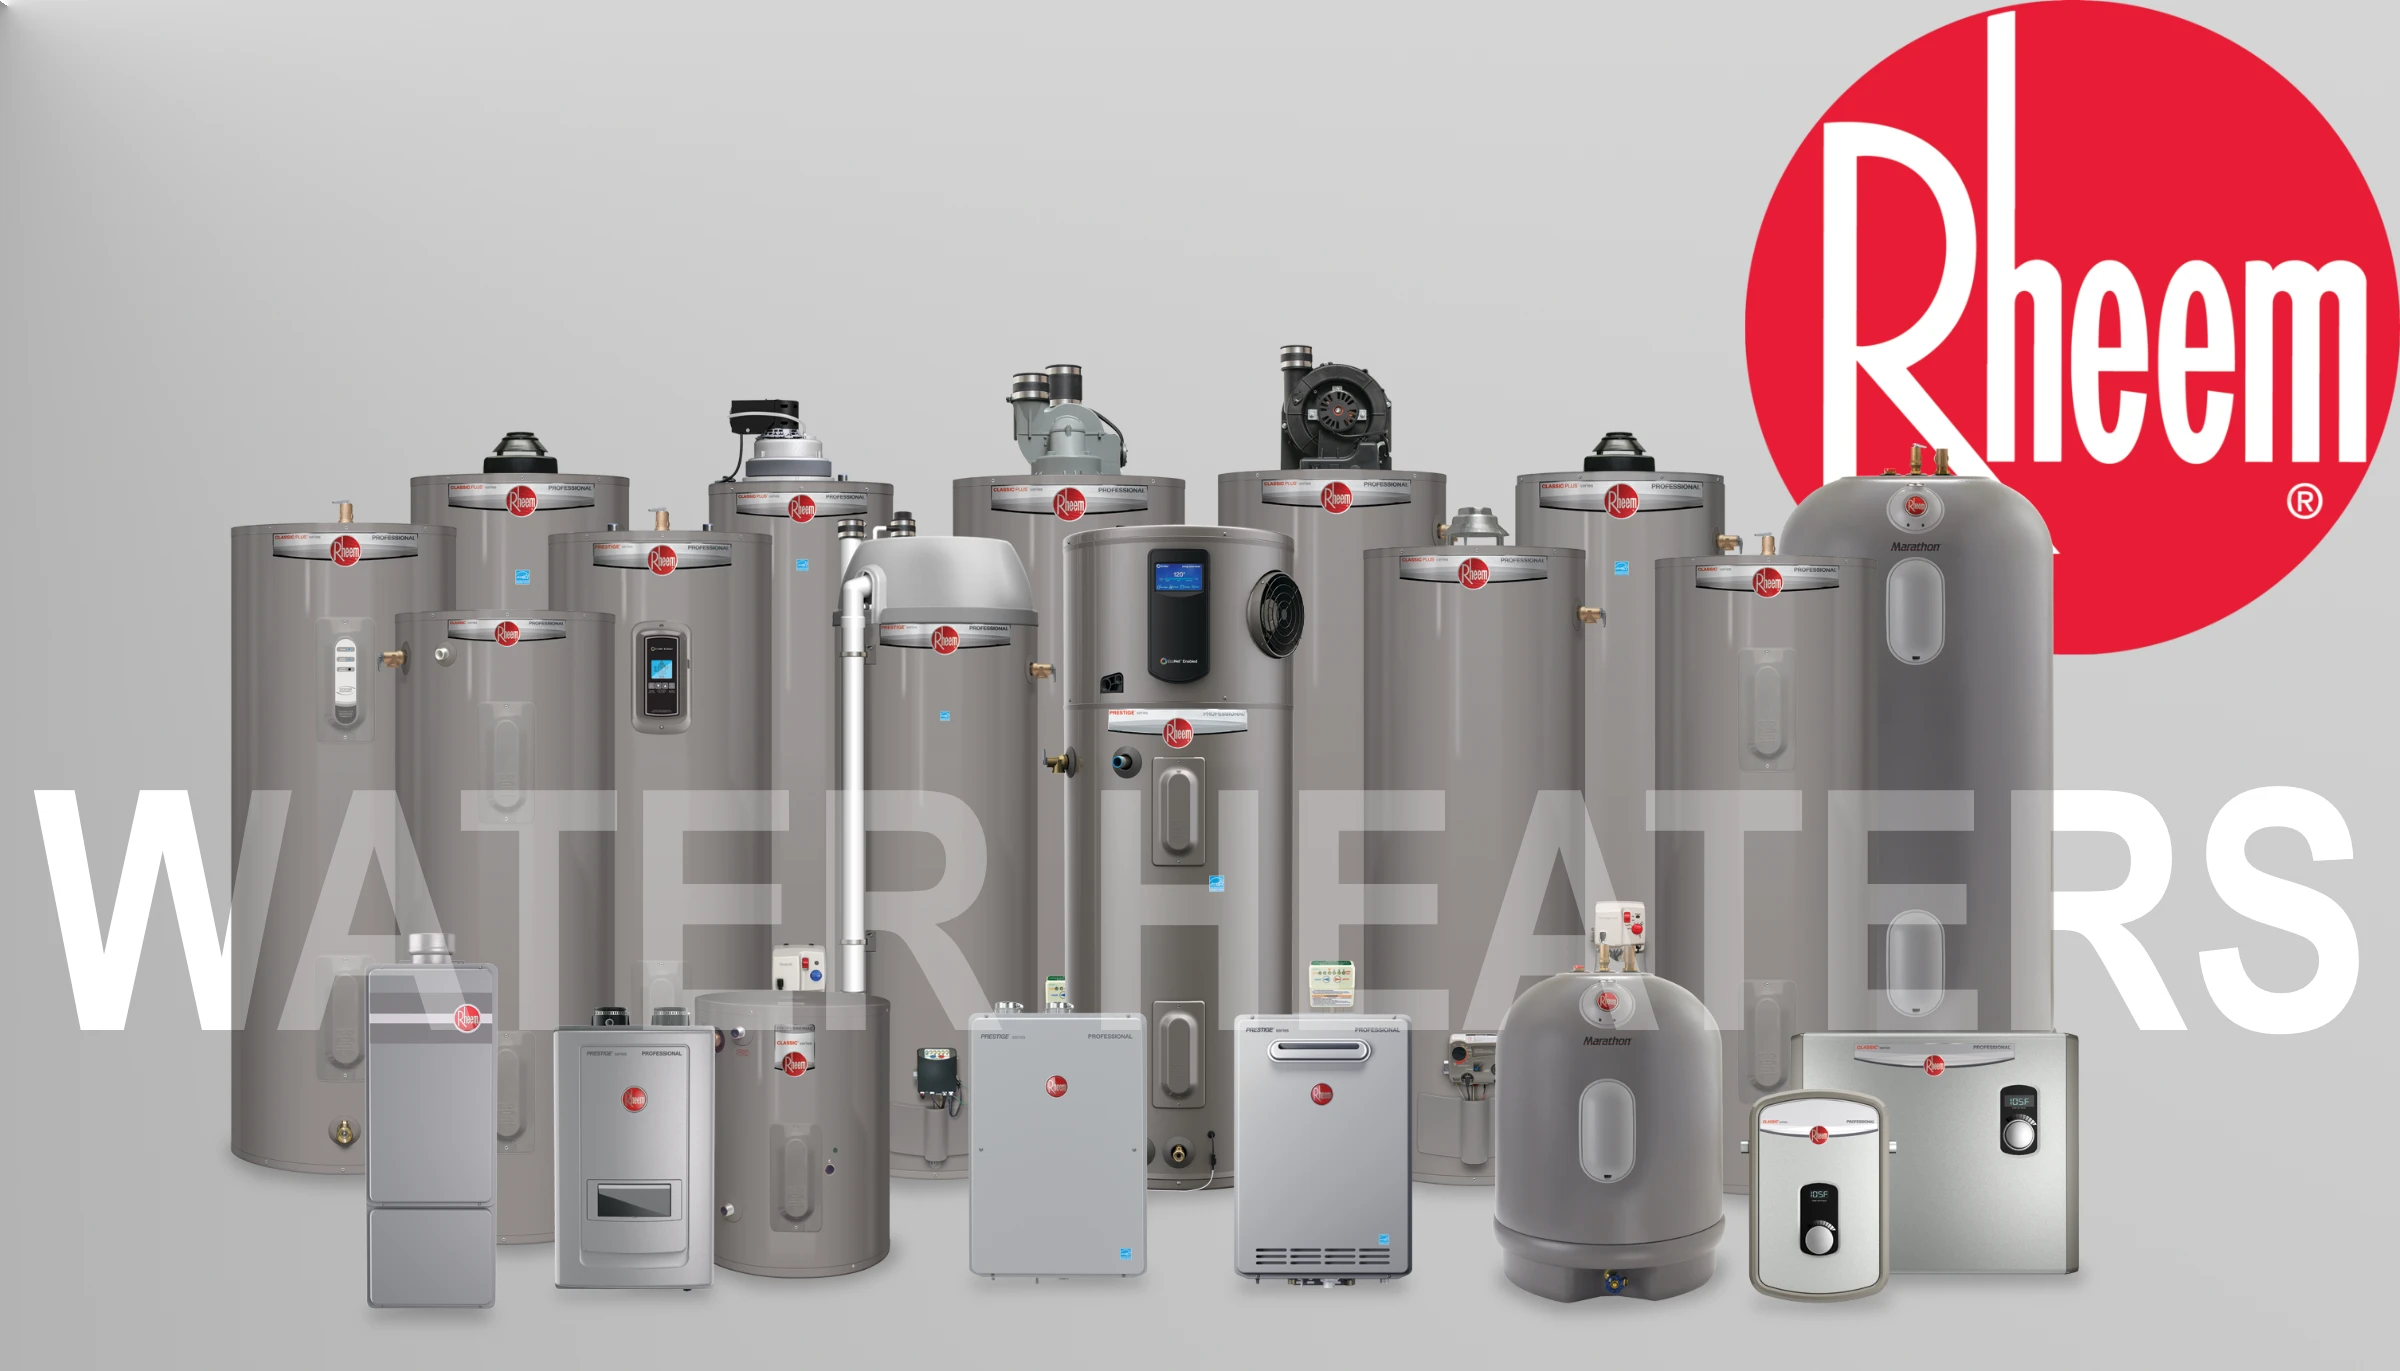 Collection of Rheem water heaters